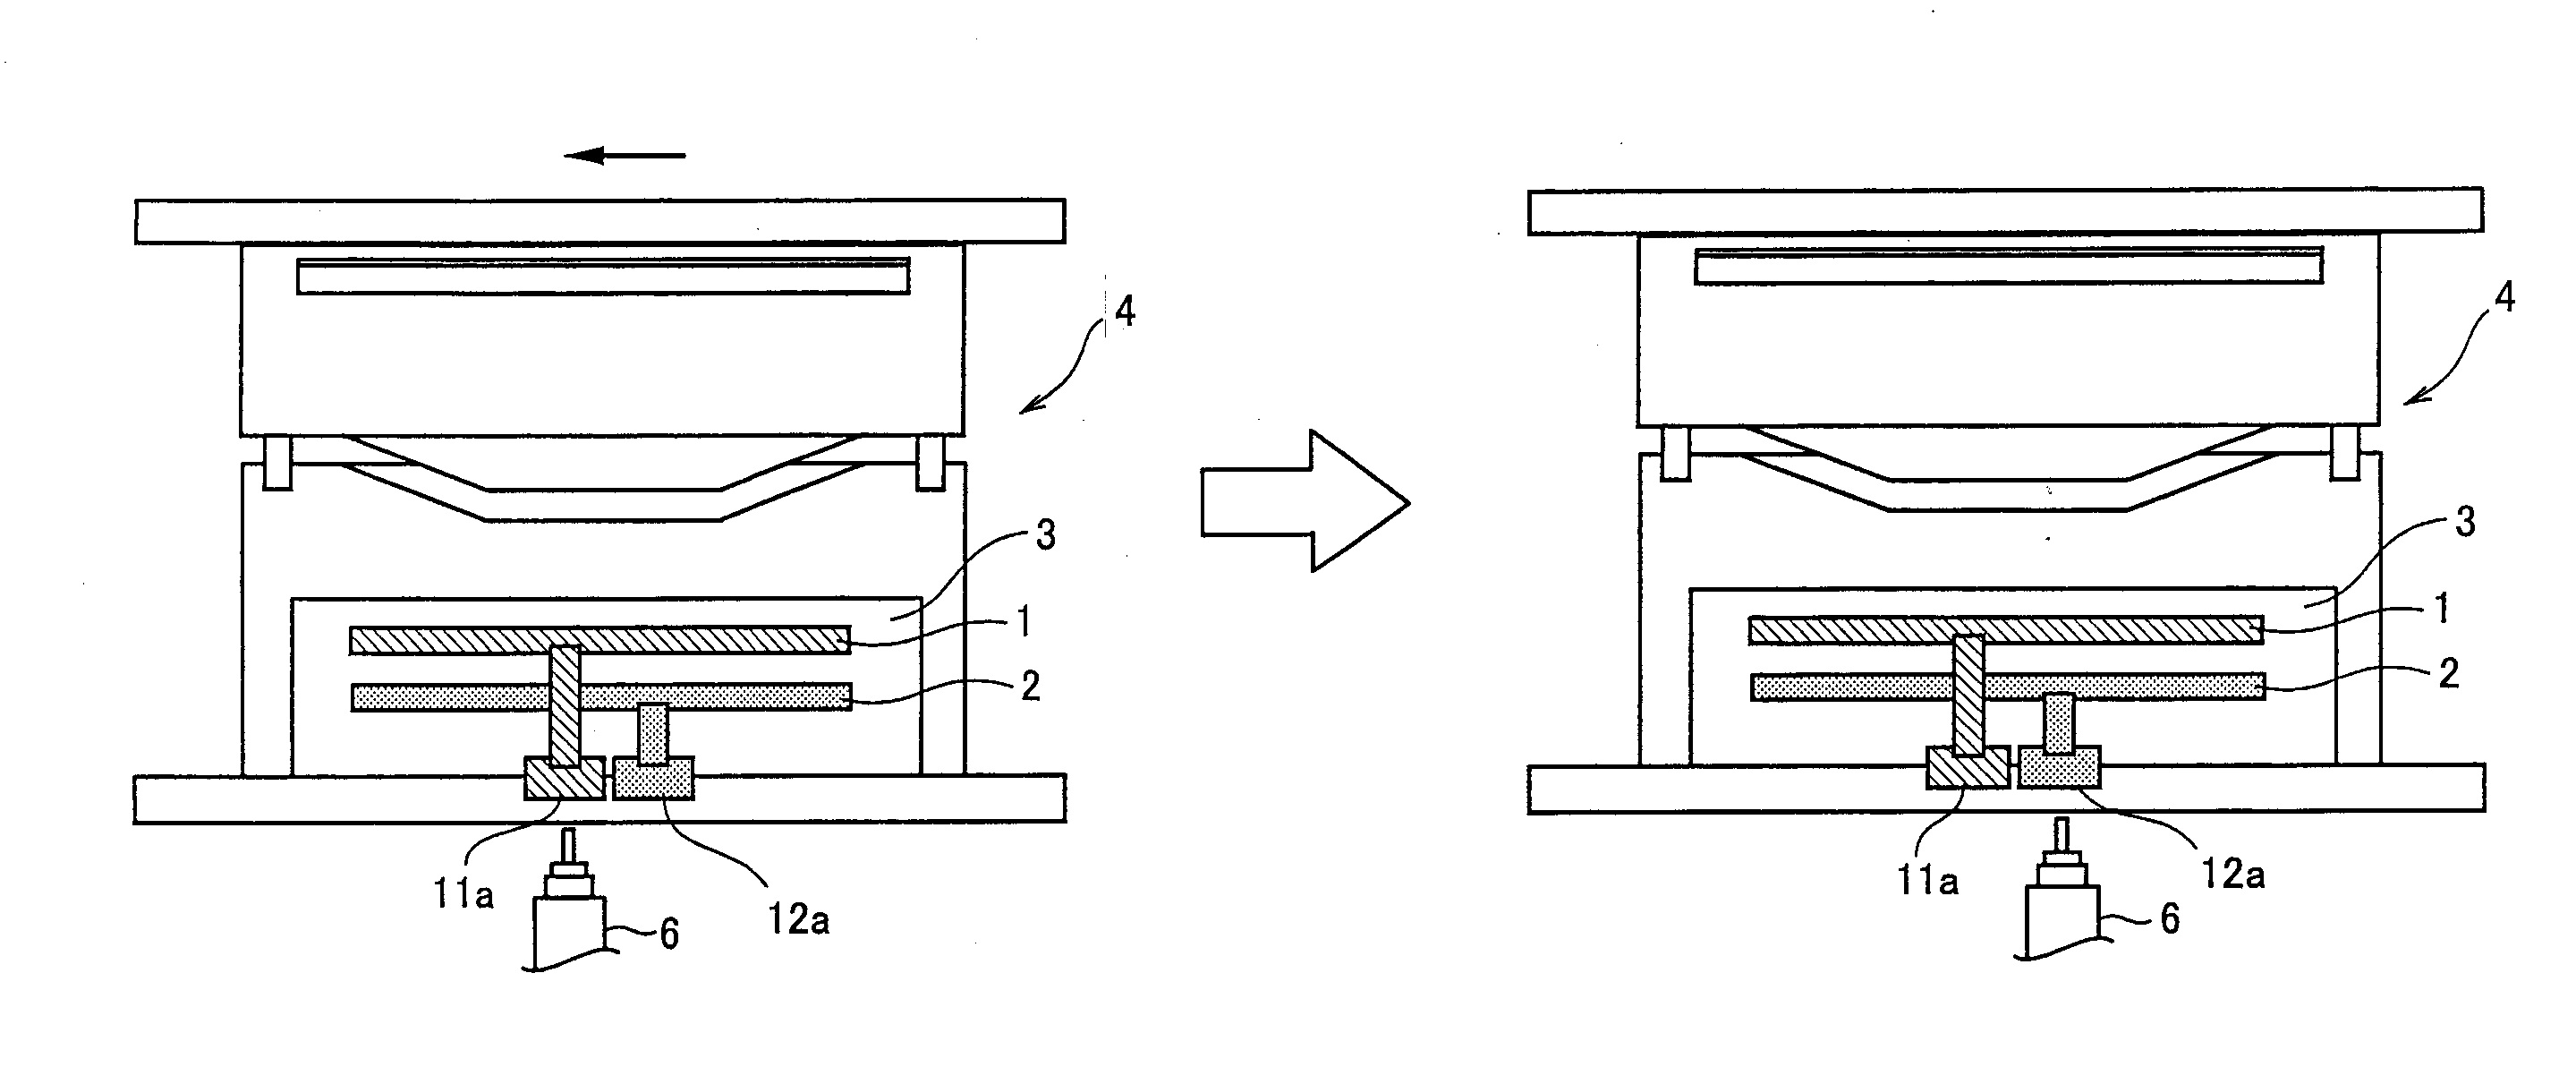 Method of and apparatus for changing colors of injection molding hot runner die